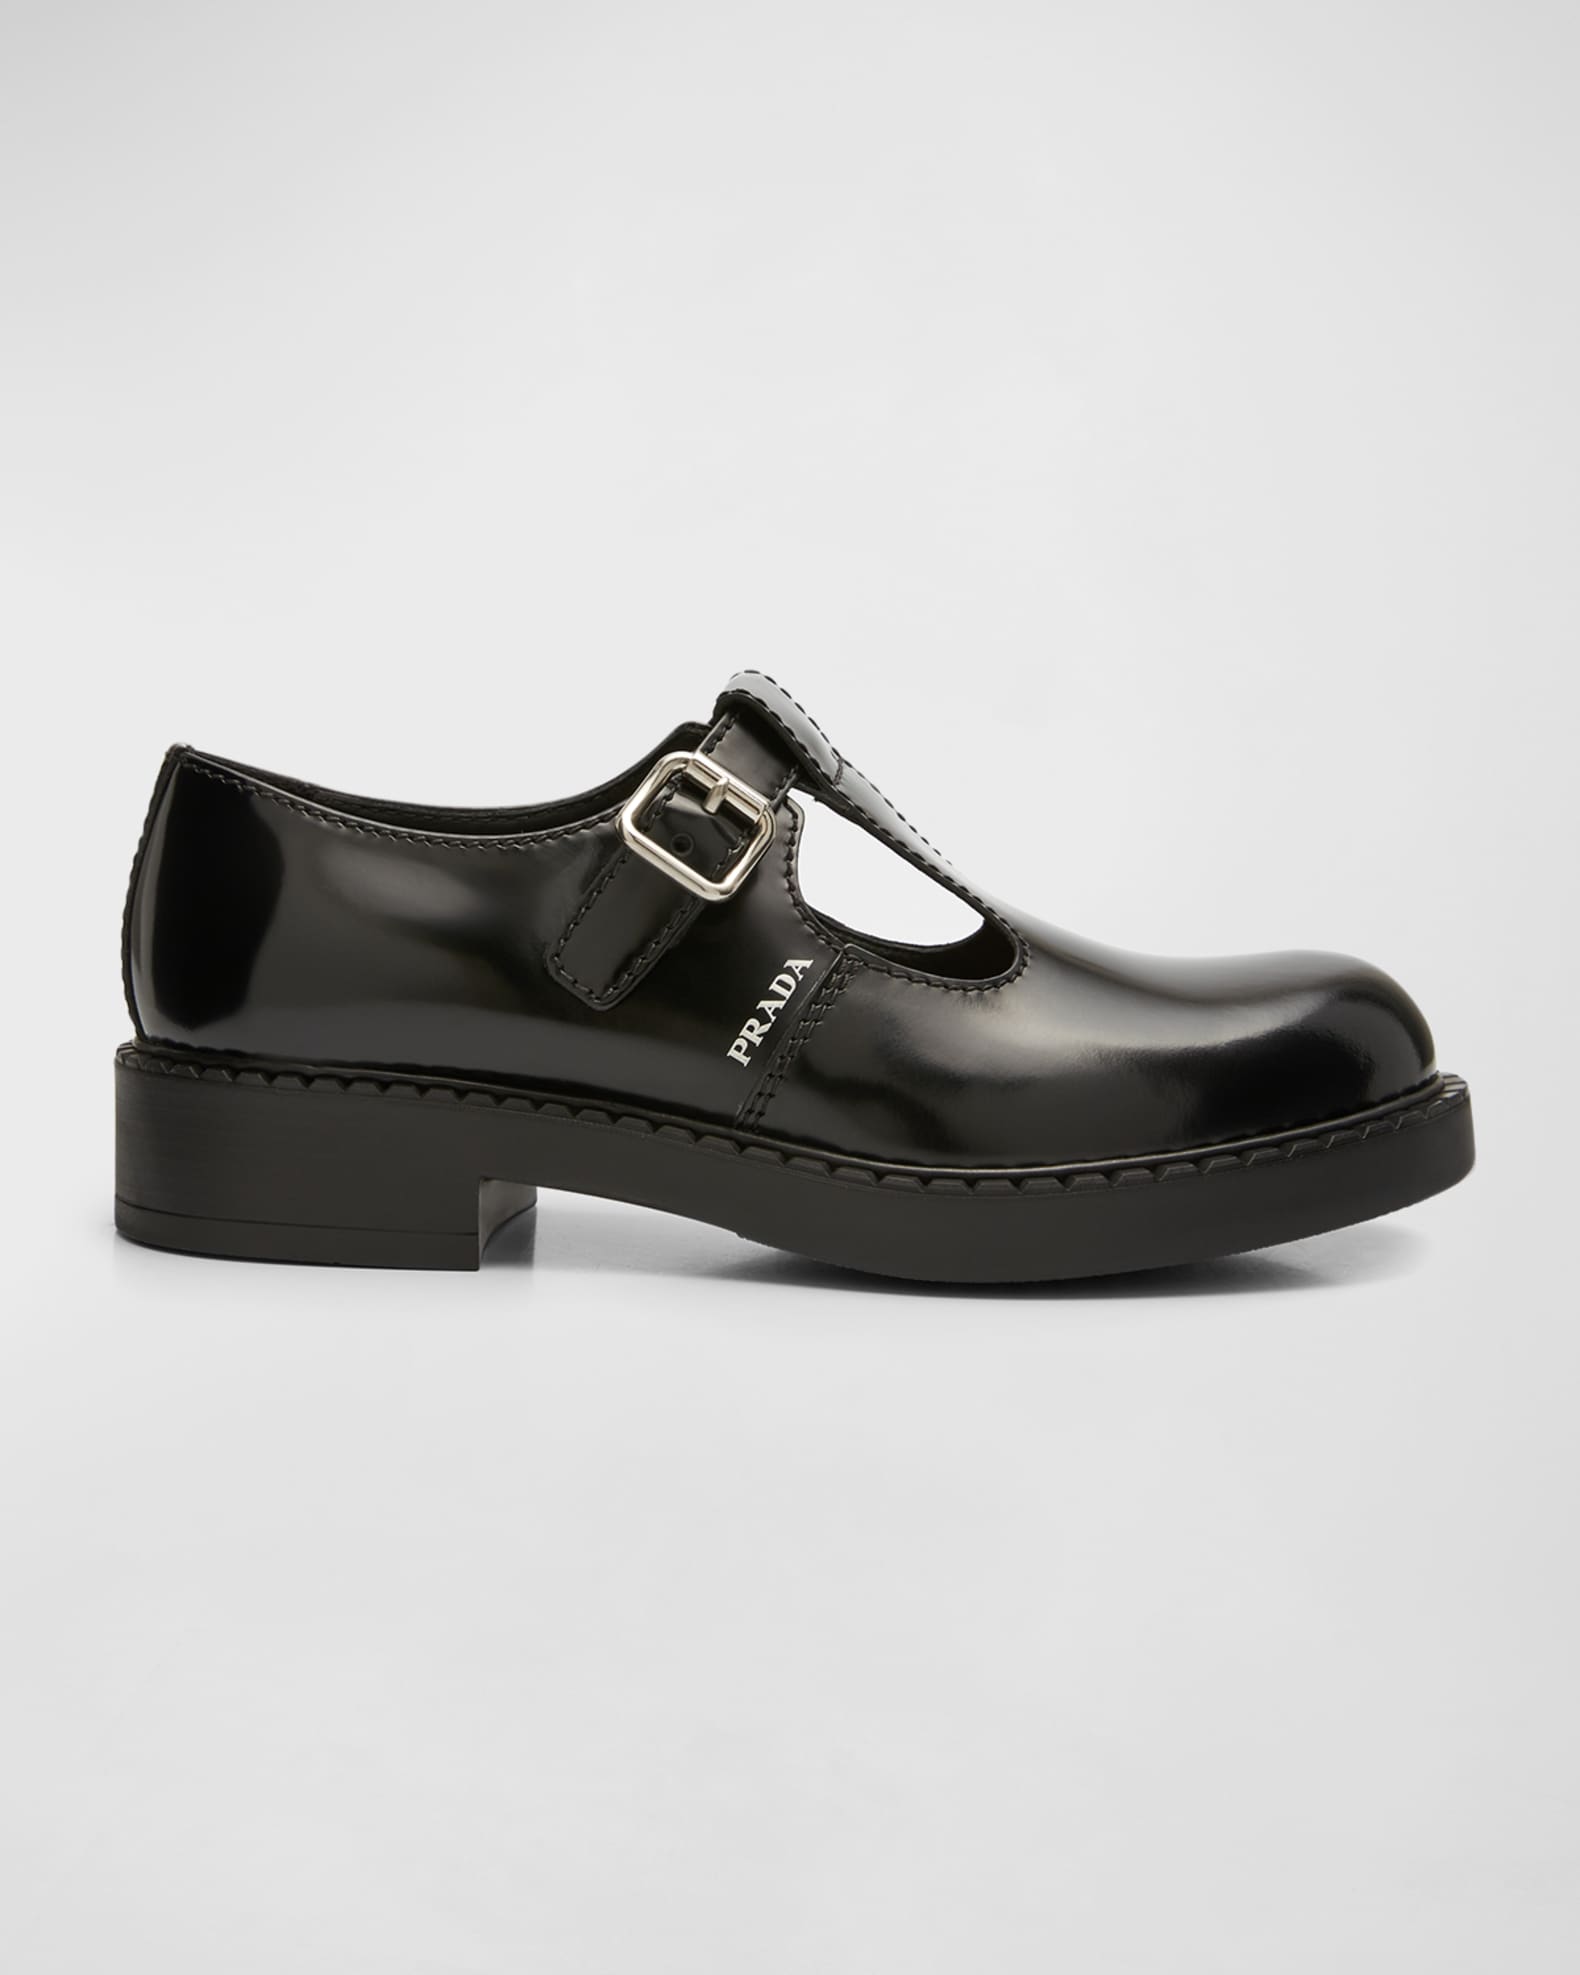 Prada Men's T-Strap Brushed Leather Mary Jane Shoes | Neiman Marcus